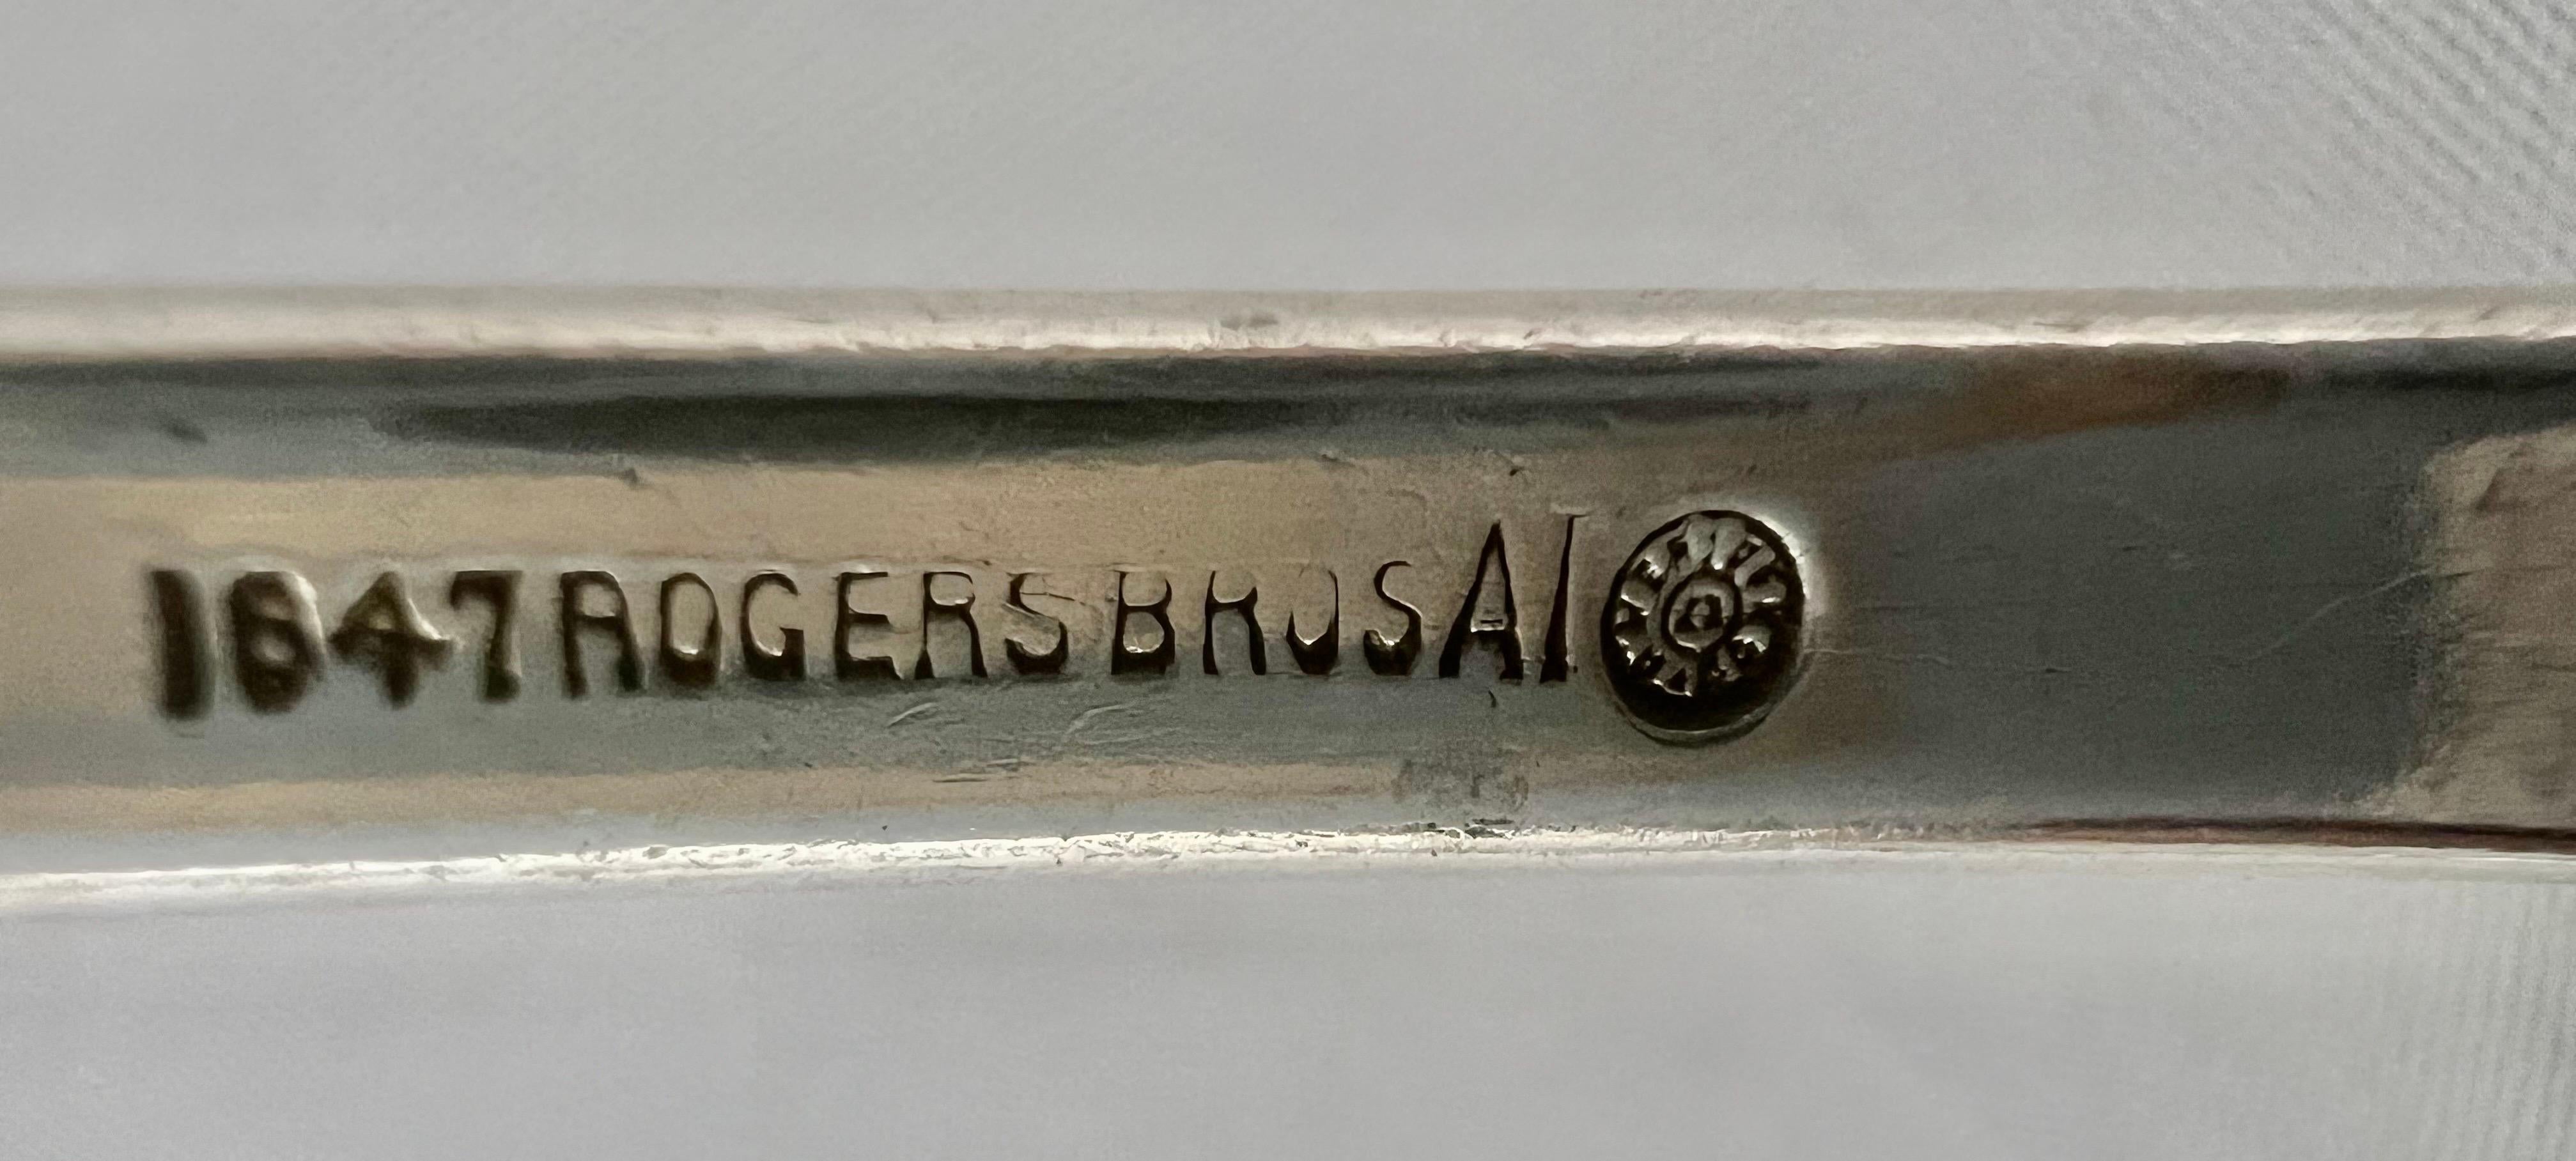 1847 rogers brothers spoon